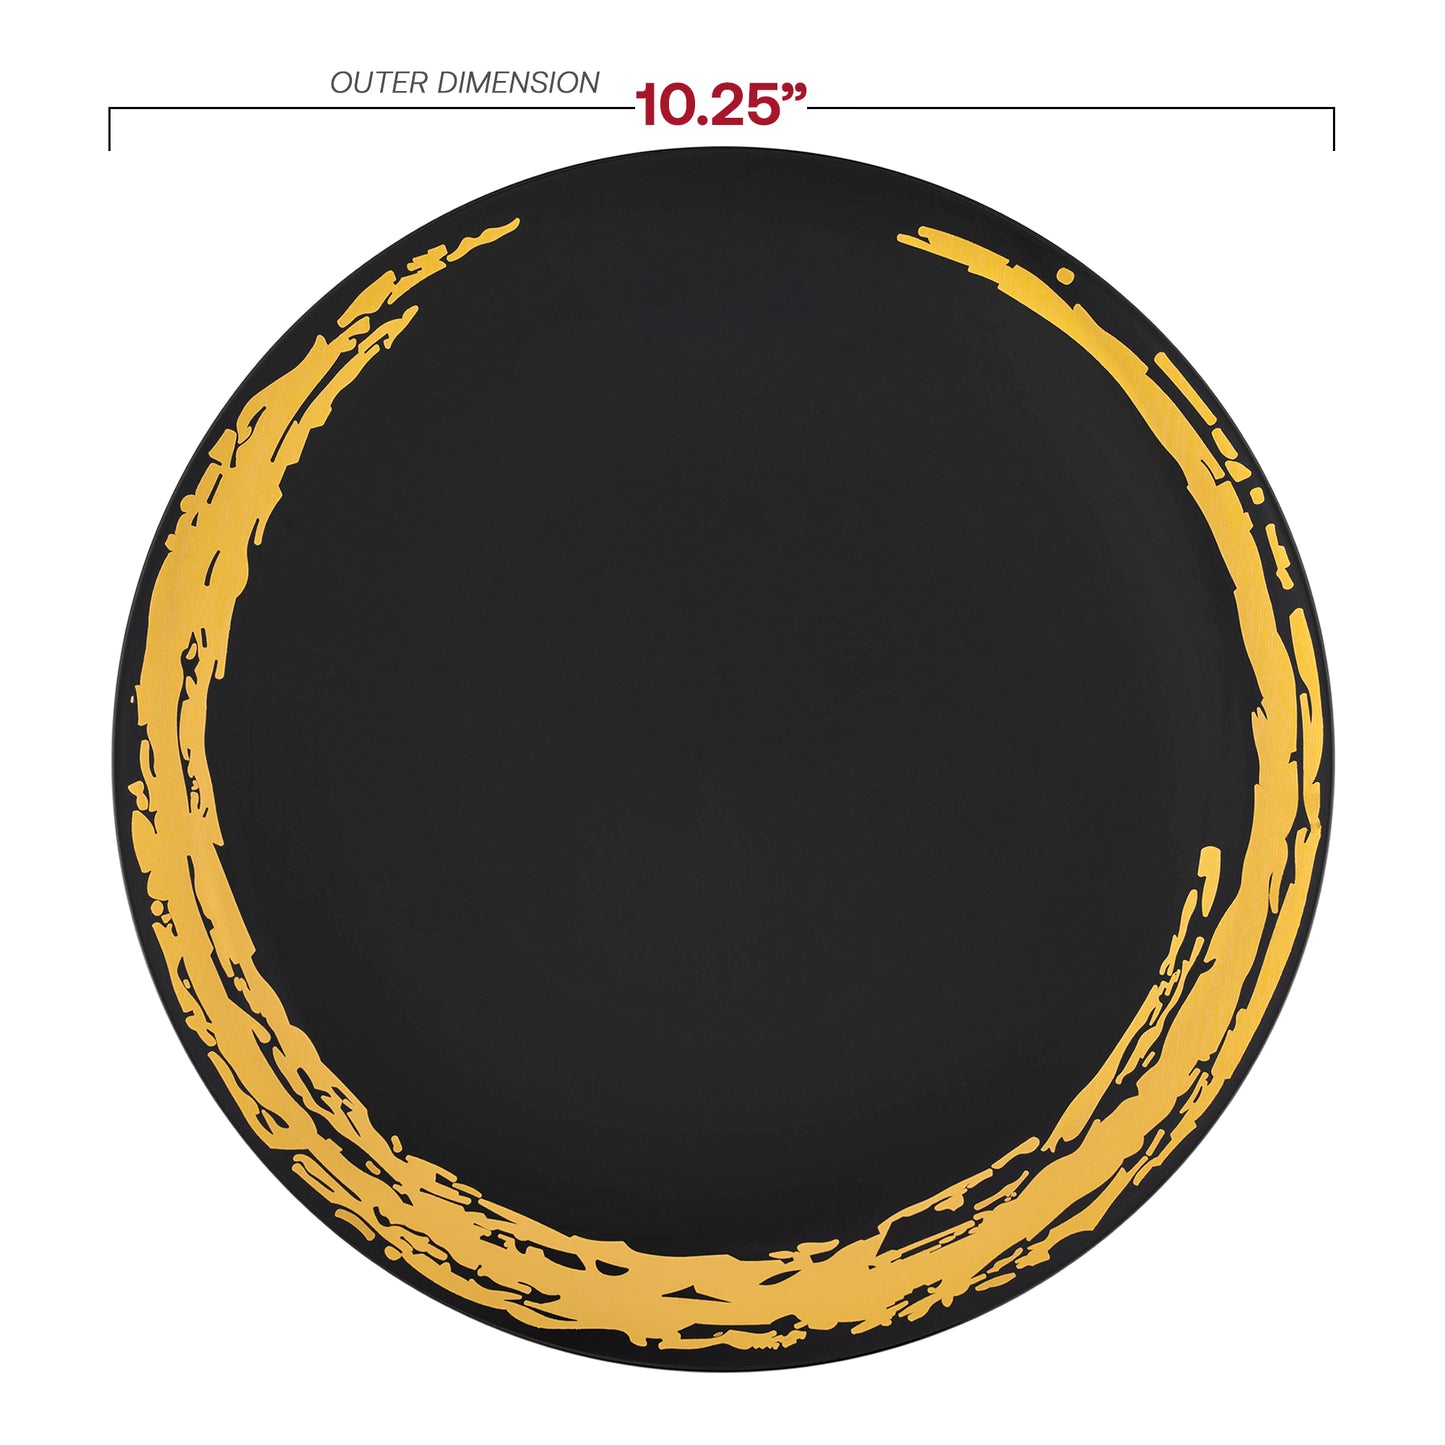 Black with Gold Moonlight Round Disposable Plastic Dinner Plates (10.25") Dimension | The Kaya Collection